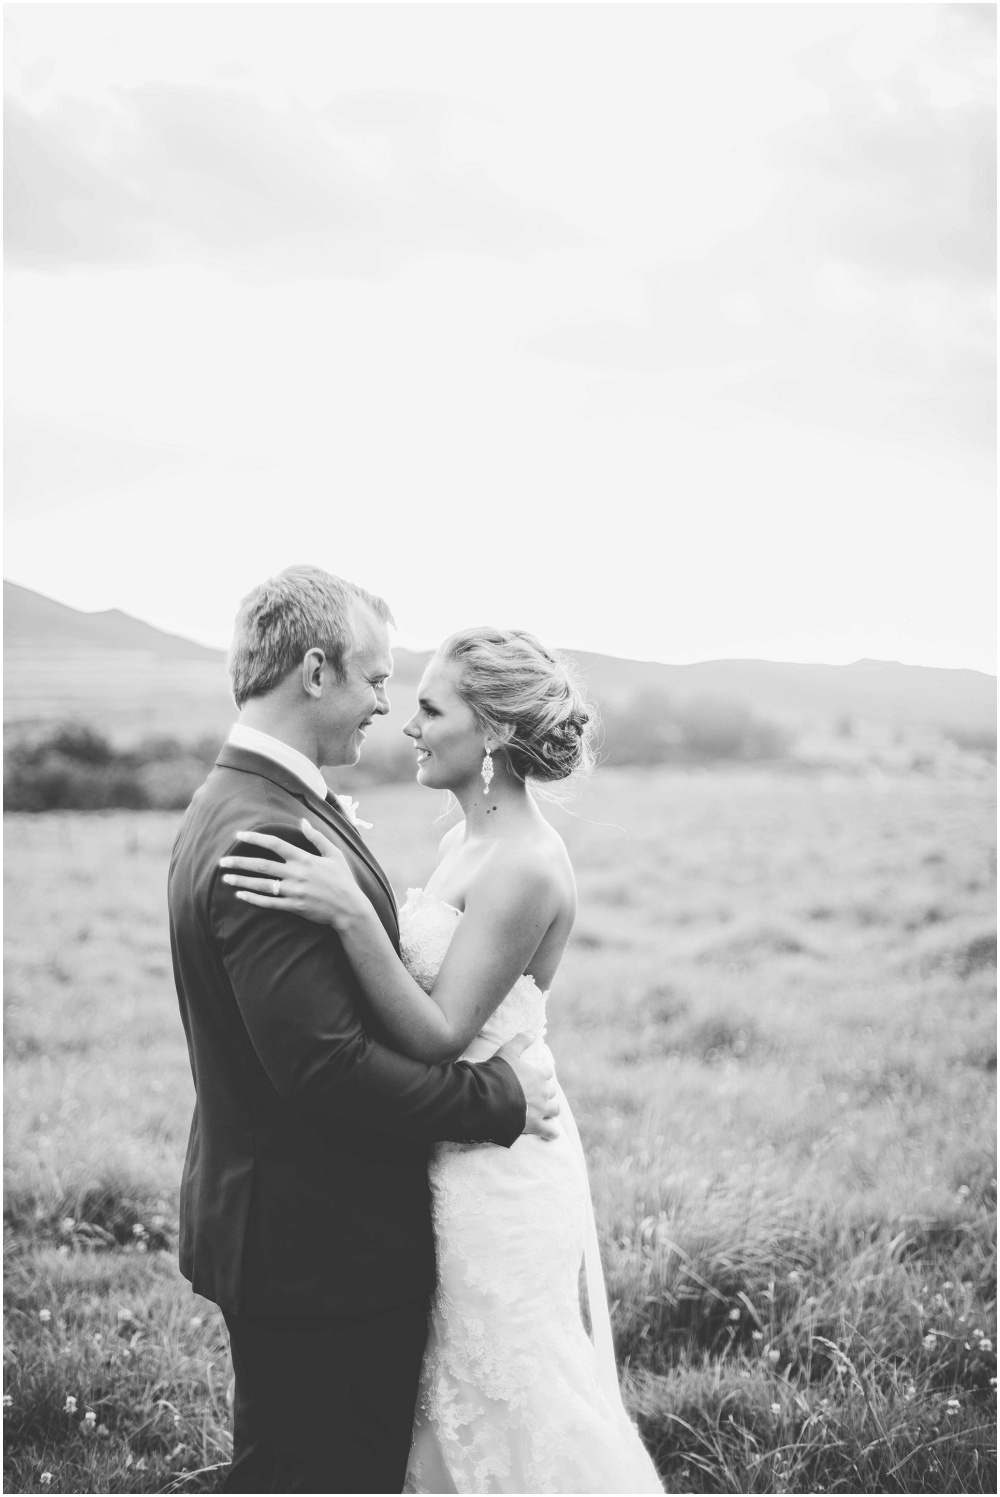 Ronel Kruger Cape Town Wedding and Lifestyle Photographer_2827.jpg